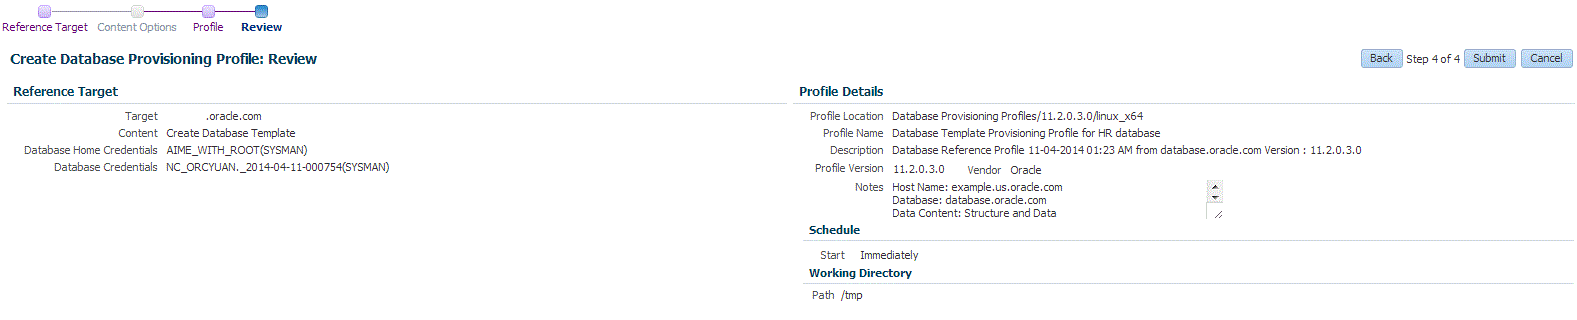 Review DB profile using database template